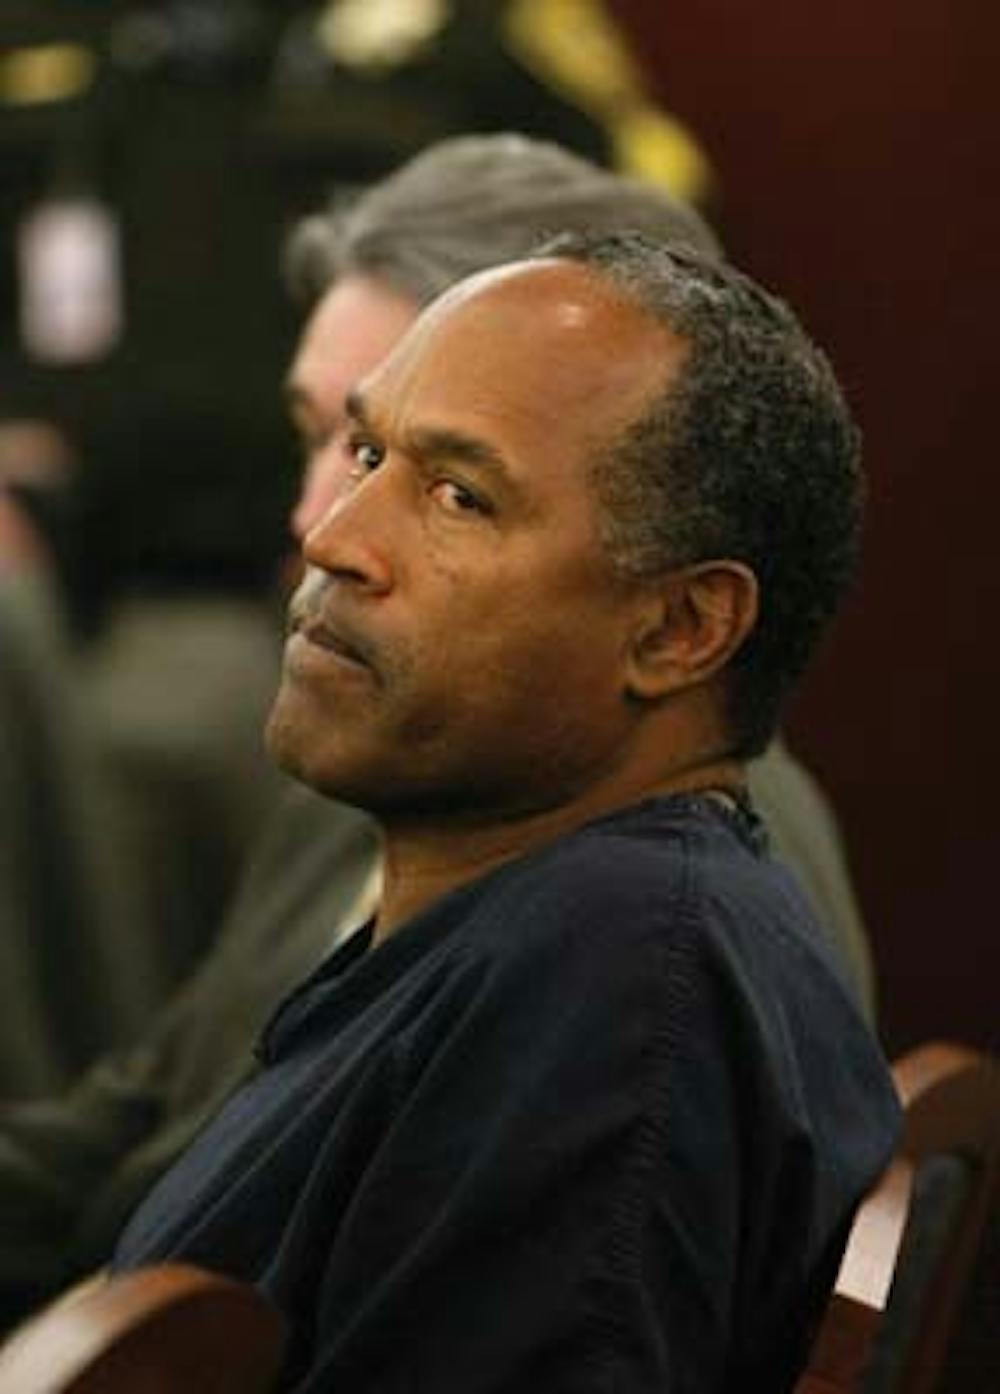 O.J. Simpson sits in a courtroom during his bail revocation hearing in Las Vegas, Wednesday, Jan. 16, 2008. An angry judge doubled O.J. Simpson's bail to $250,000 on Wednesday for violating terms of his original bail by attempting to contact a co-defendant in his armed robbery case. (AP Photo/Rick Wilking, Pool)